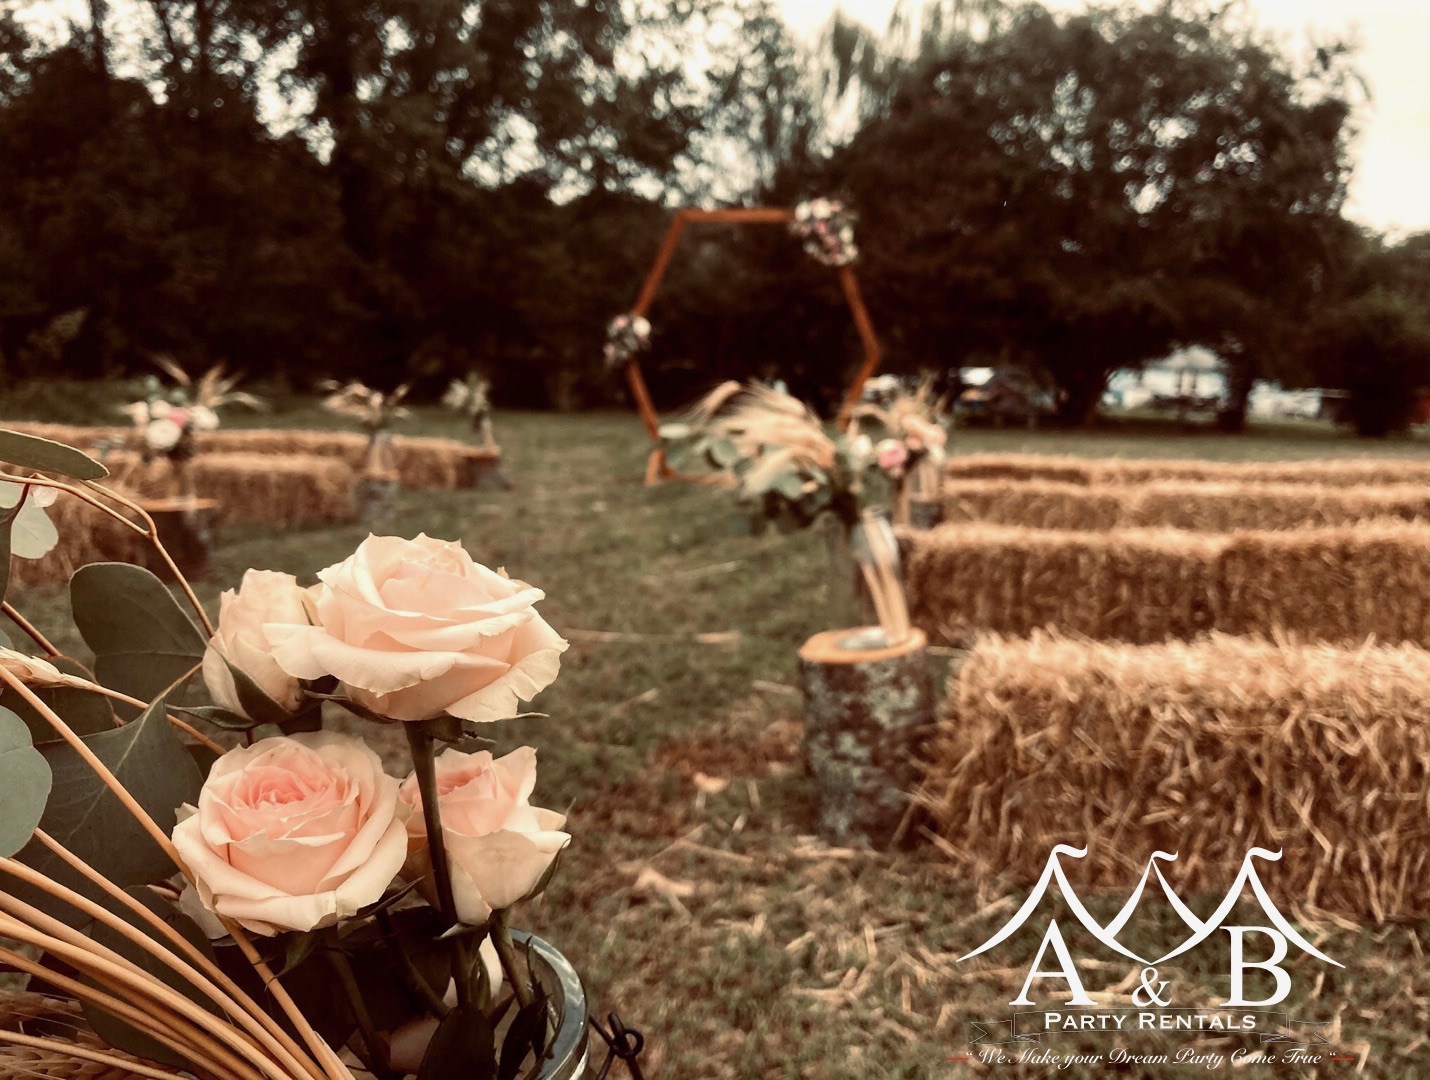 A cedar archway in the background of a wedding aisle outdoors, surrounded by rows of haystacks and flowers for a wedding. The image captures a scenic outdoor wedding setting with a cedar archway overlooking the wedding aisle, complemented by rows of haystacks and floral arrangements. This charming scene is perfect for outdoor weddings and is provided by A&B Party Rentals in Salisbury, MD.